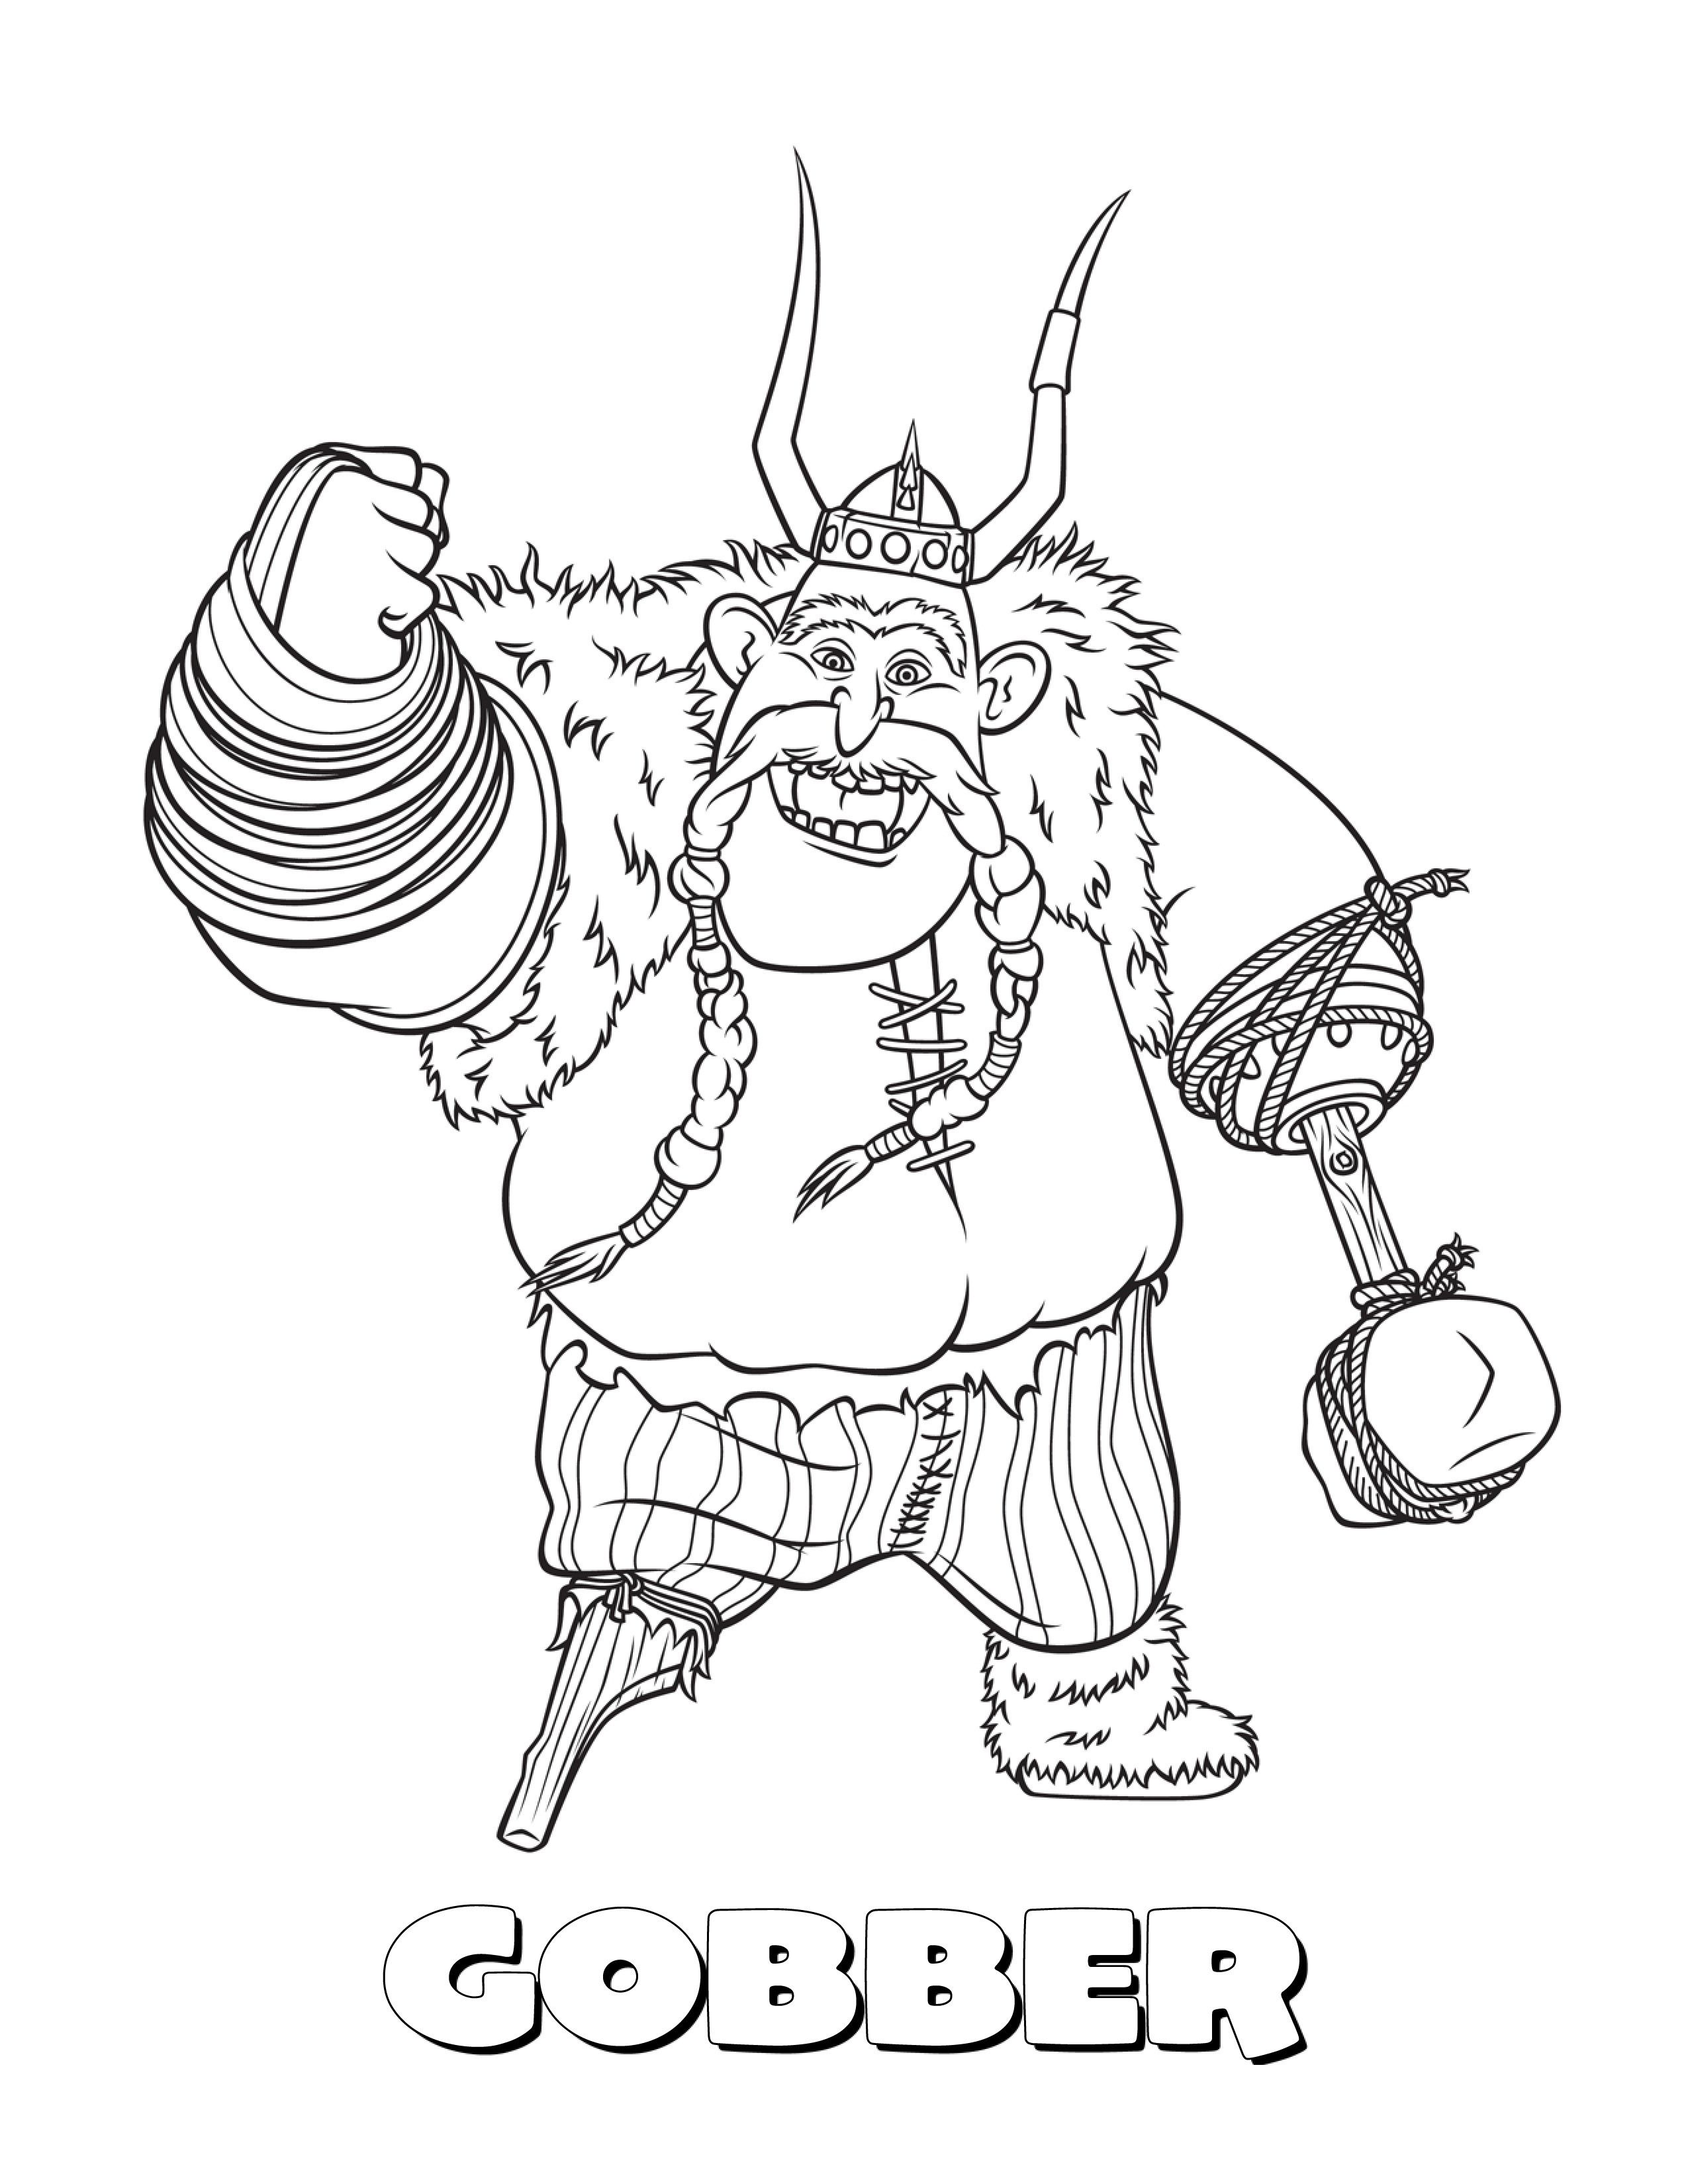 Free Httyd Coloring Pages, Download Free Httyd Coloring ...